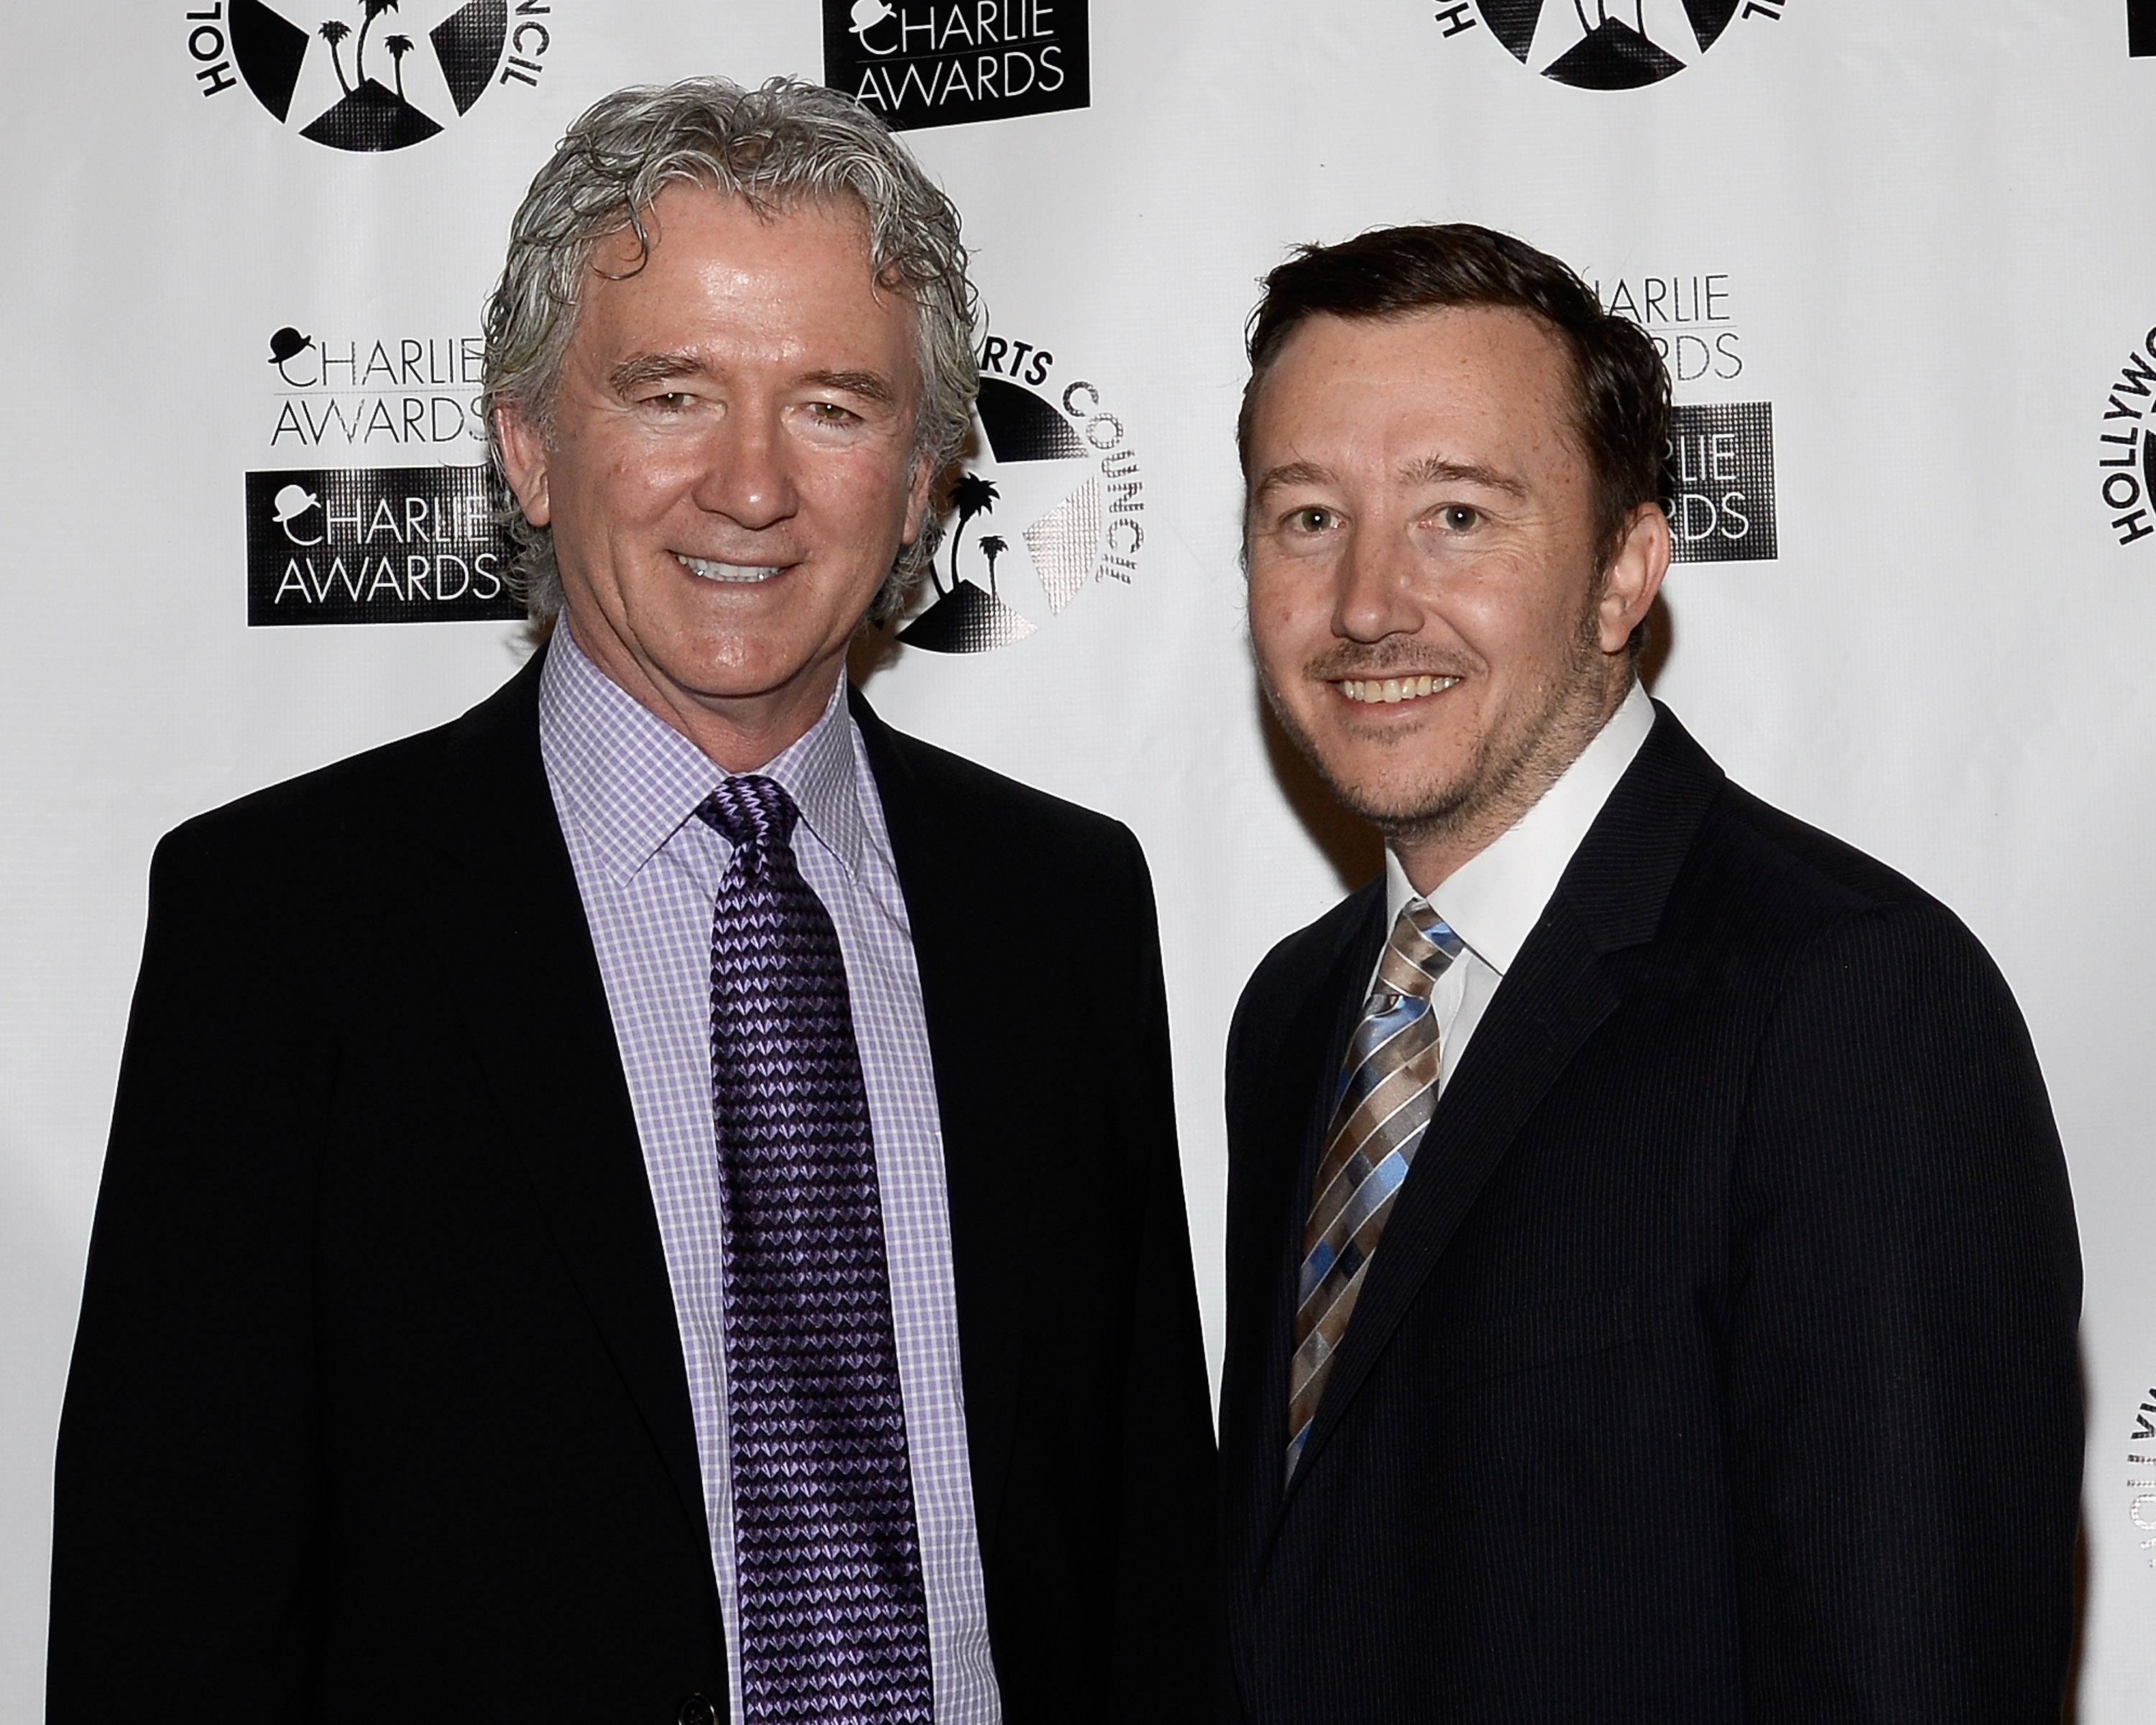 Patrick and Padraic Duffy at the 29th Annual Charlie Awards Luncheon by The Hollywood Arts Council on May 1, 2015, in Hollywood, California. | Source: Getty Images